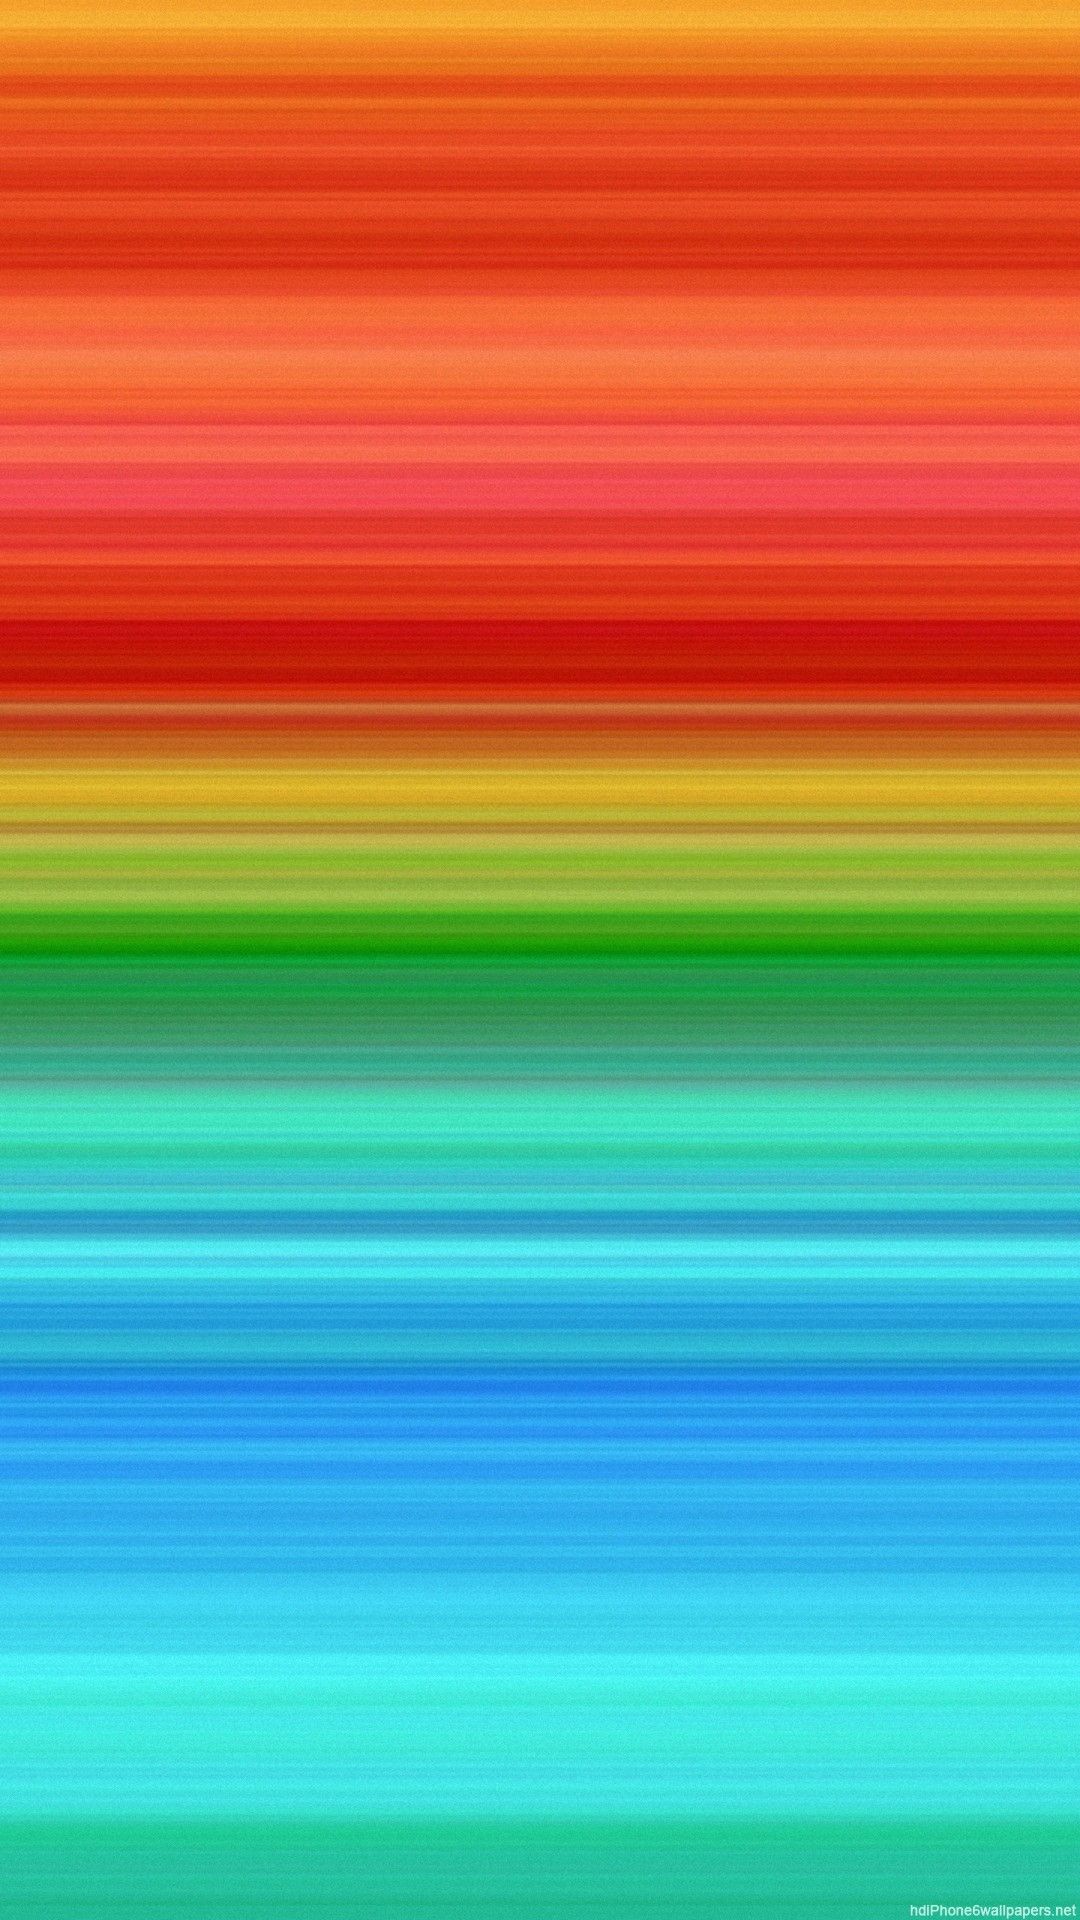 iPhoneXpapers.com | iPhone X wallpaper | we14-pattern-background-apple -iphone12-rainbow